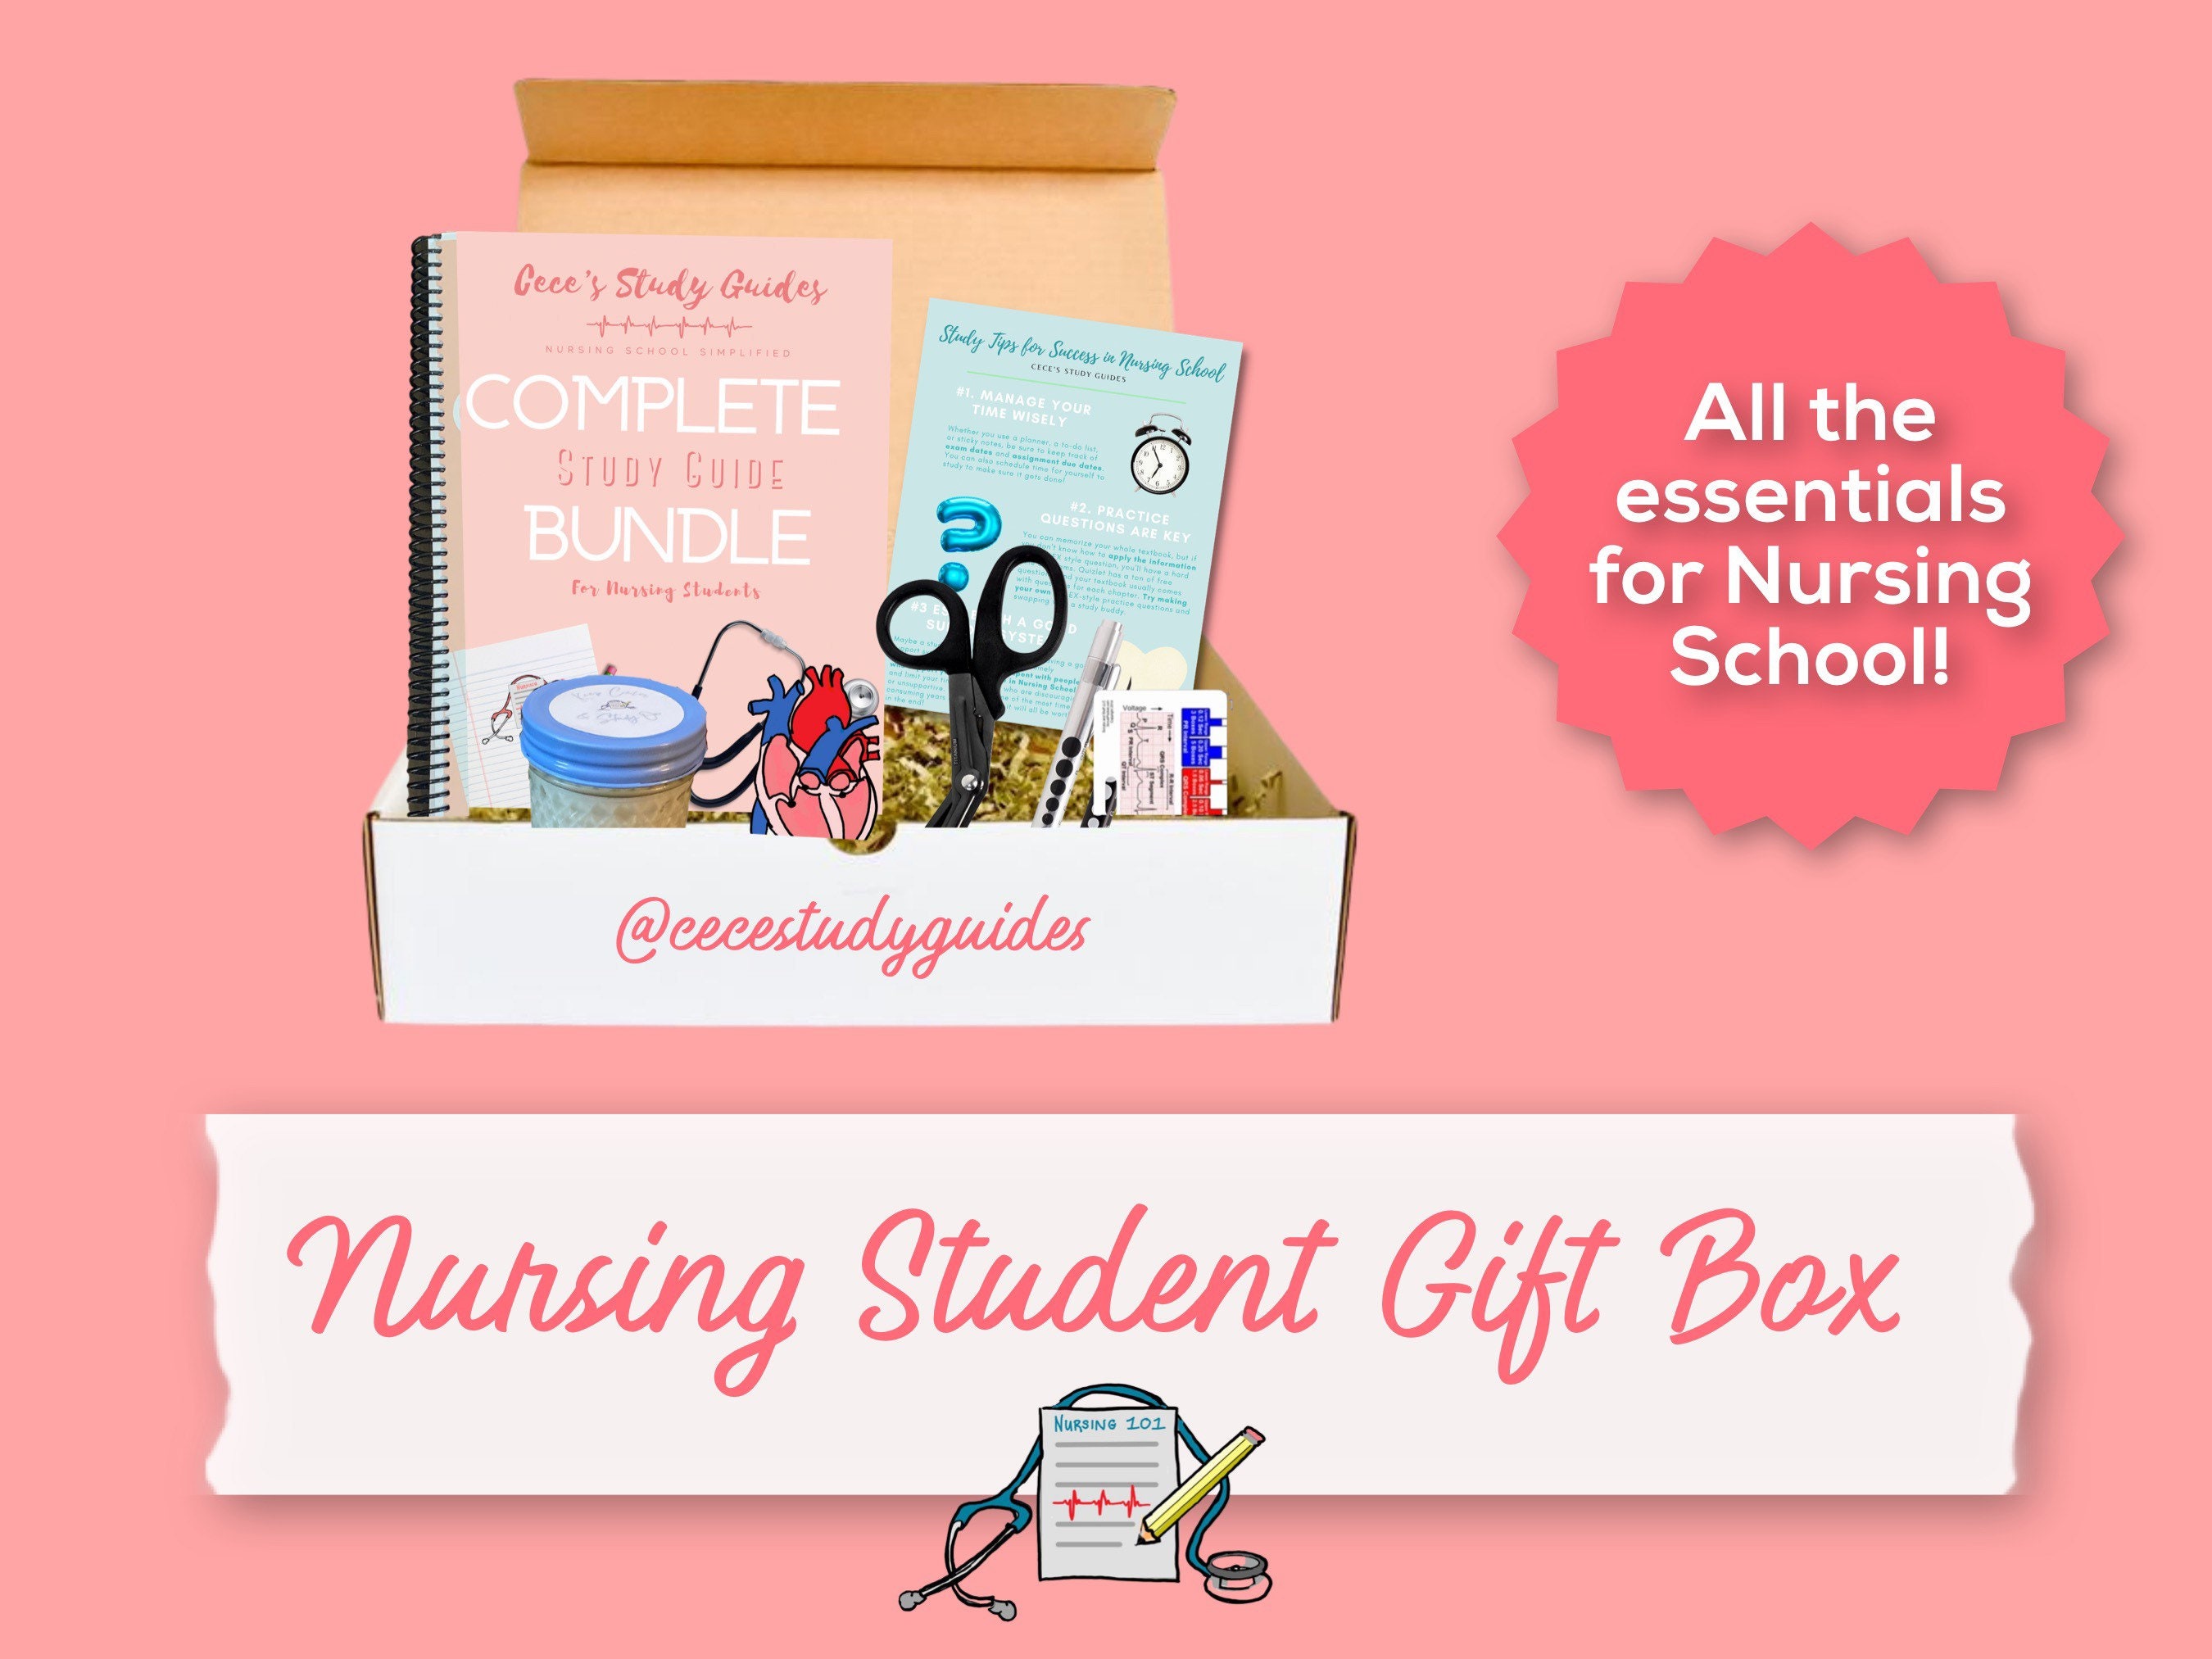 Nursing Student Gift Box - Includes the Complete Study Guide